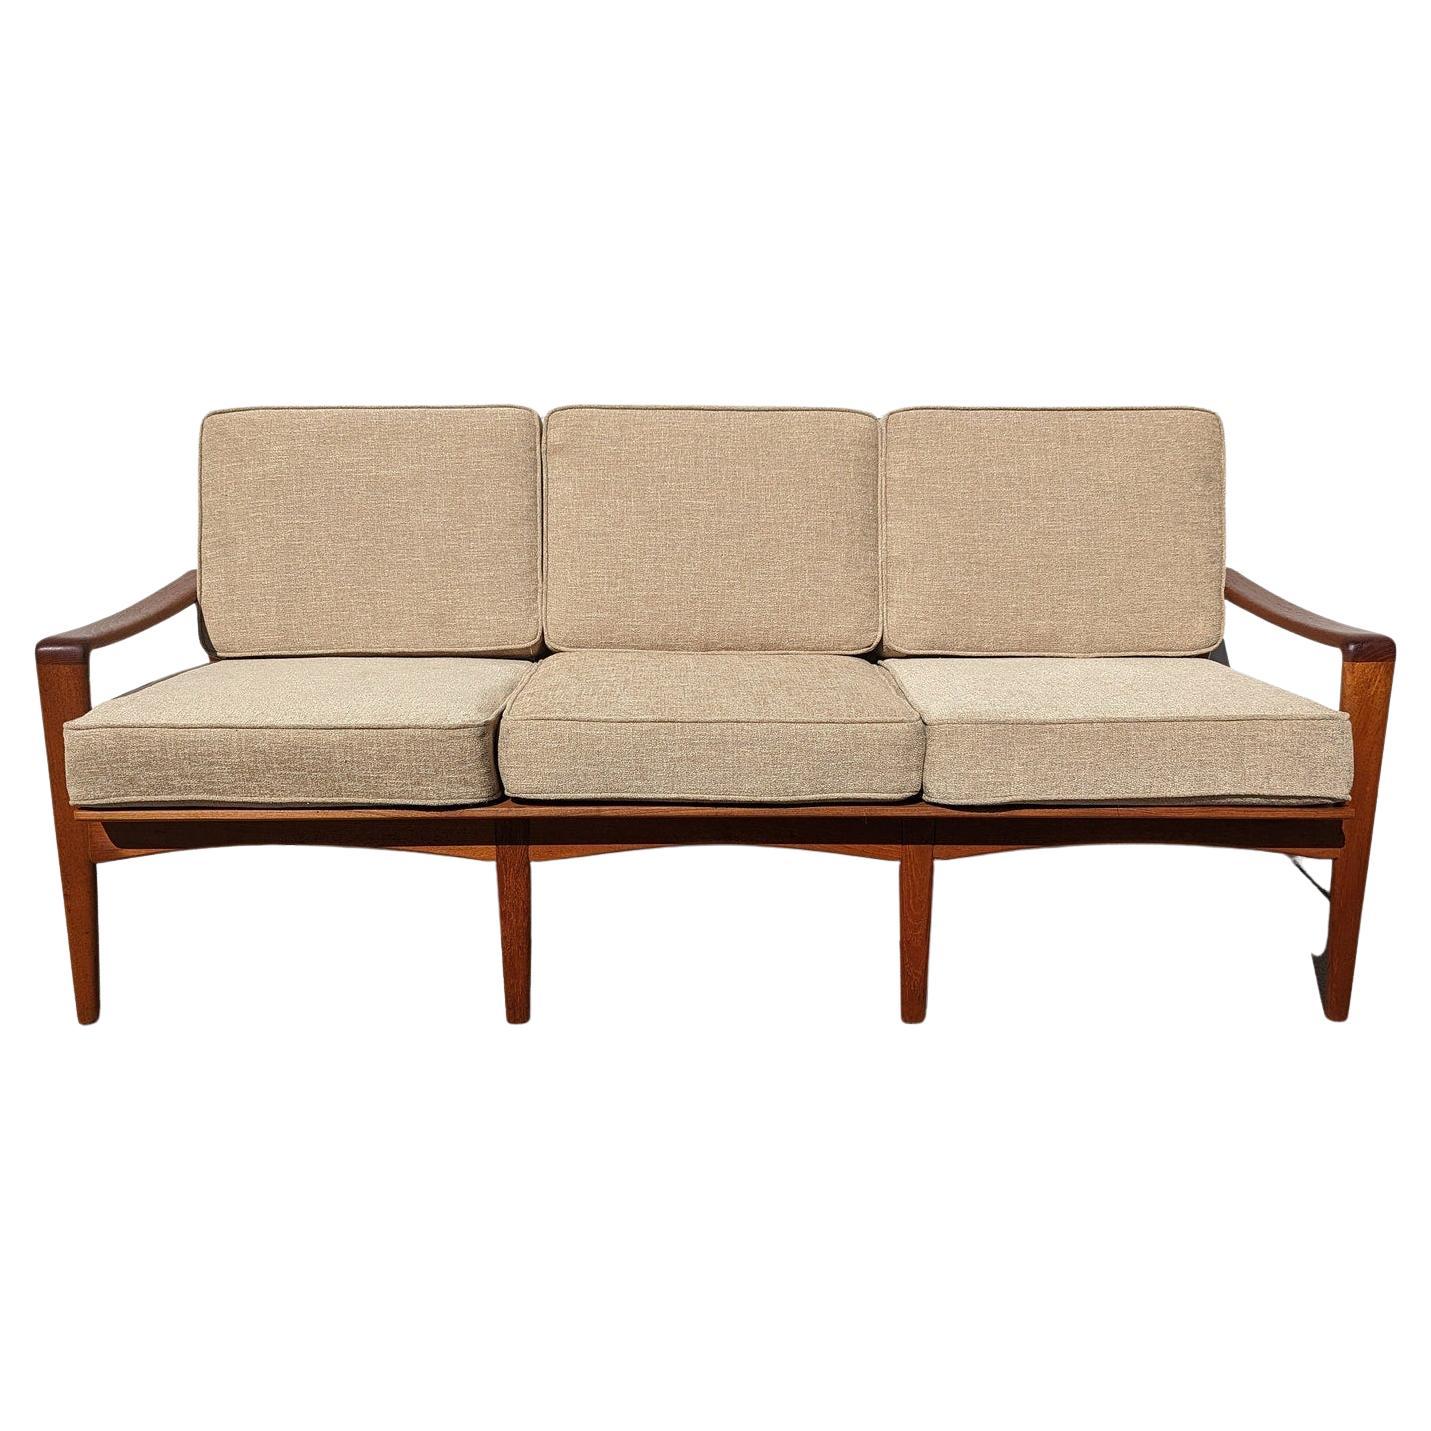 Mid Century Danish Modern Solid Teak Sofa by Arne Wahl Iversen

Above average vintage condition and structurally sound. Has some expected slight finish wear and scratching on frame. Upholstery is new. Outdoor listing pictures might appear slightly